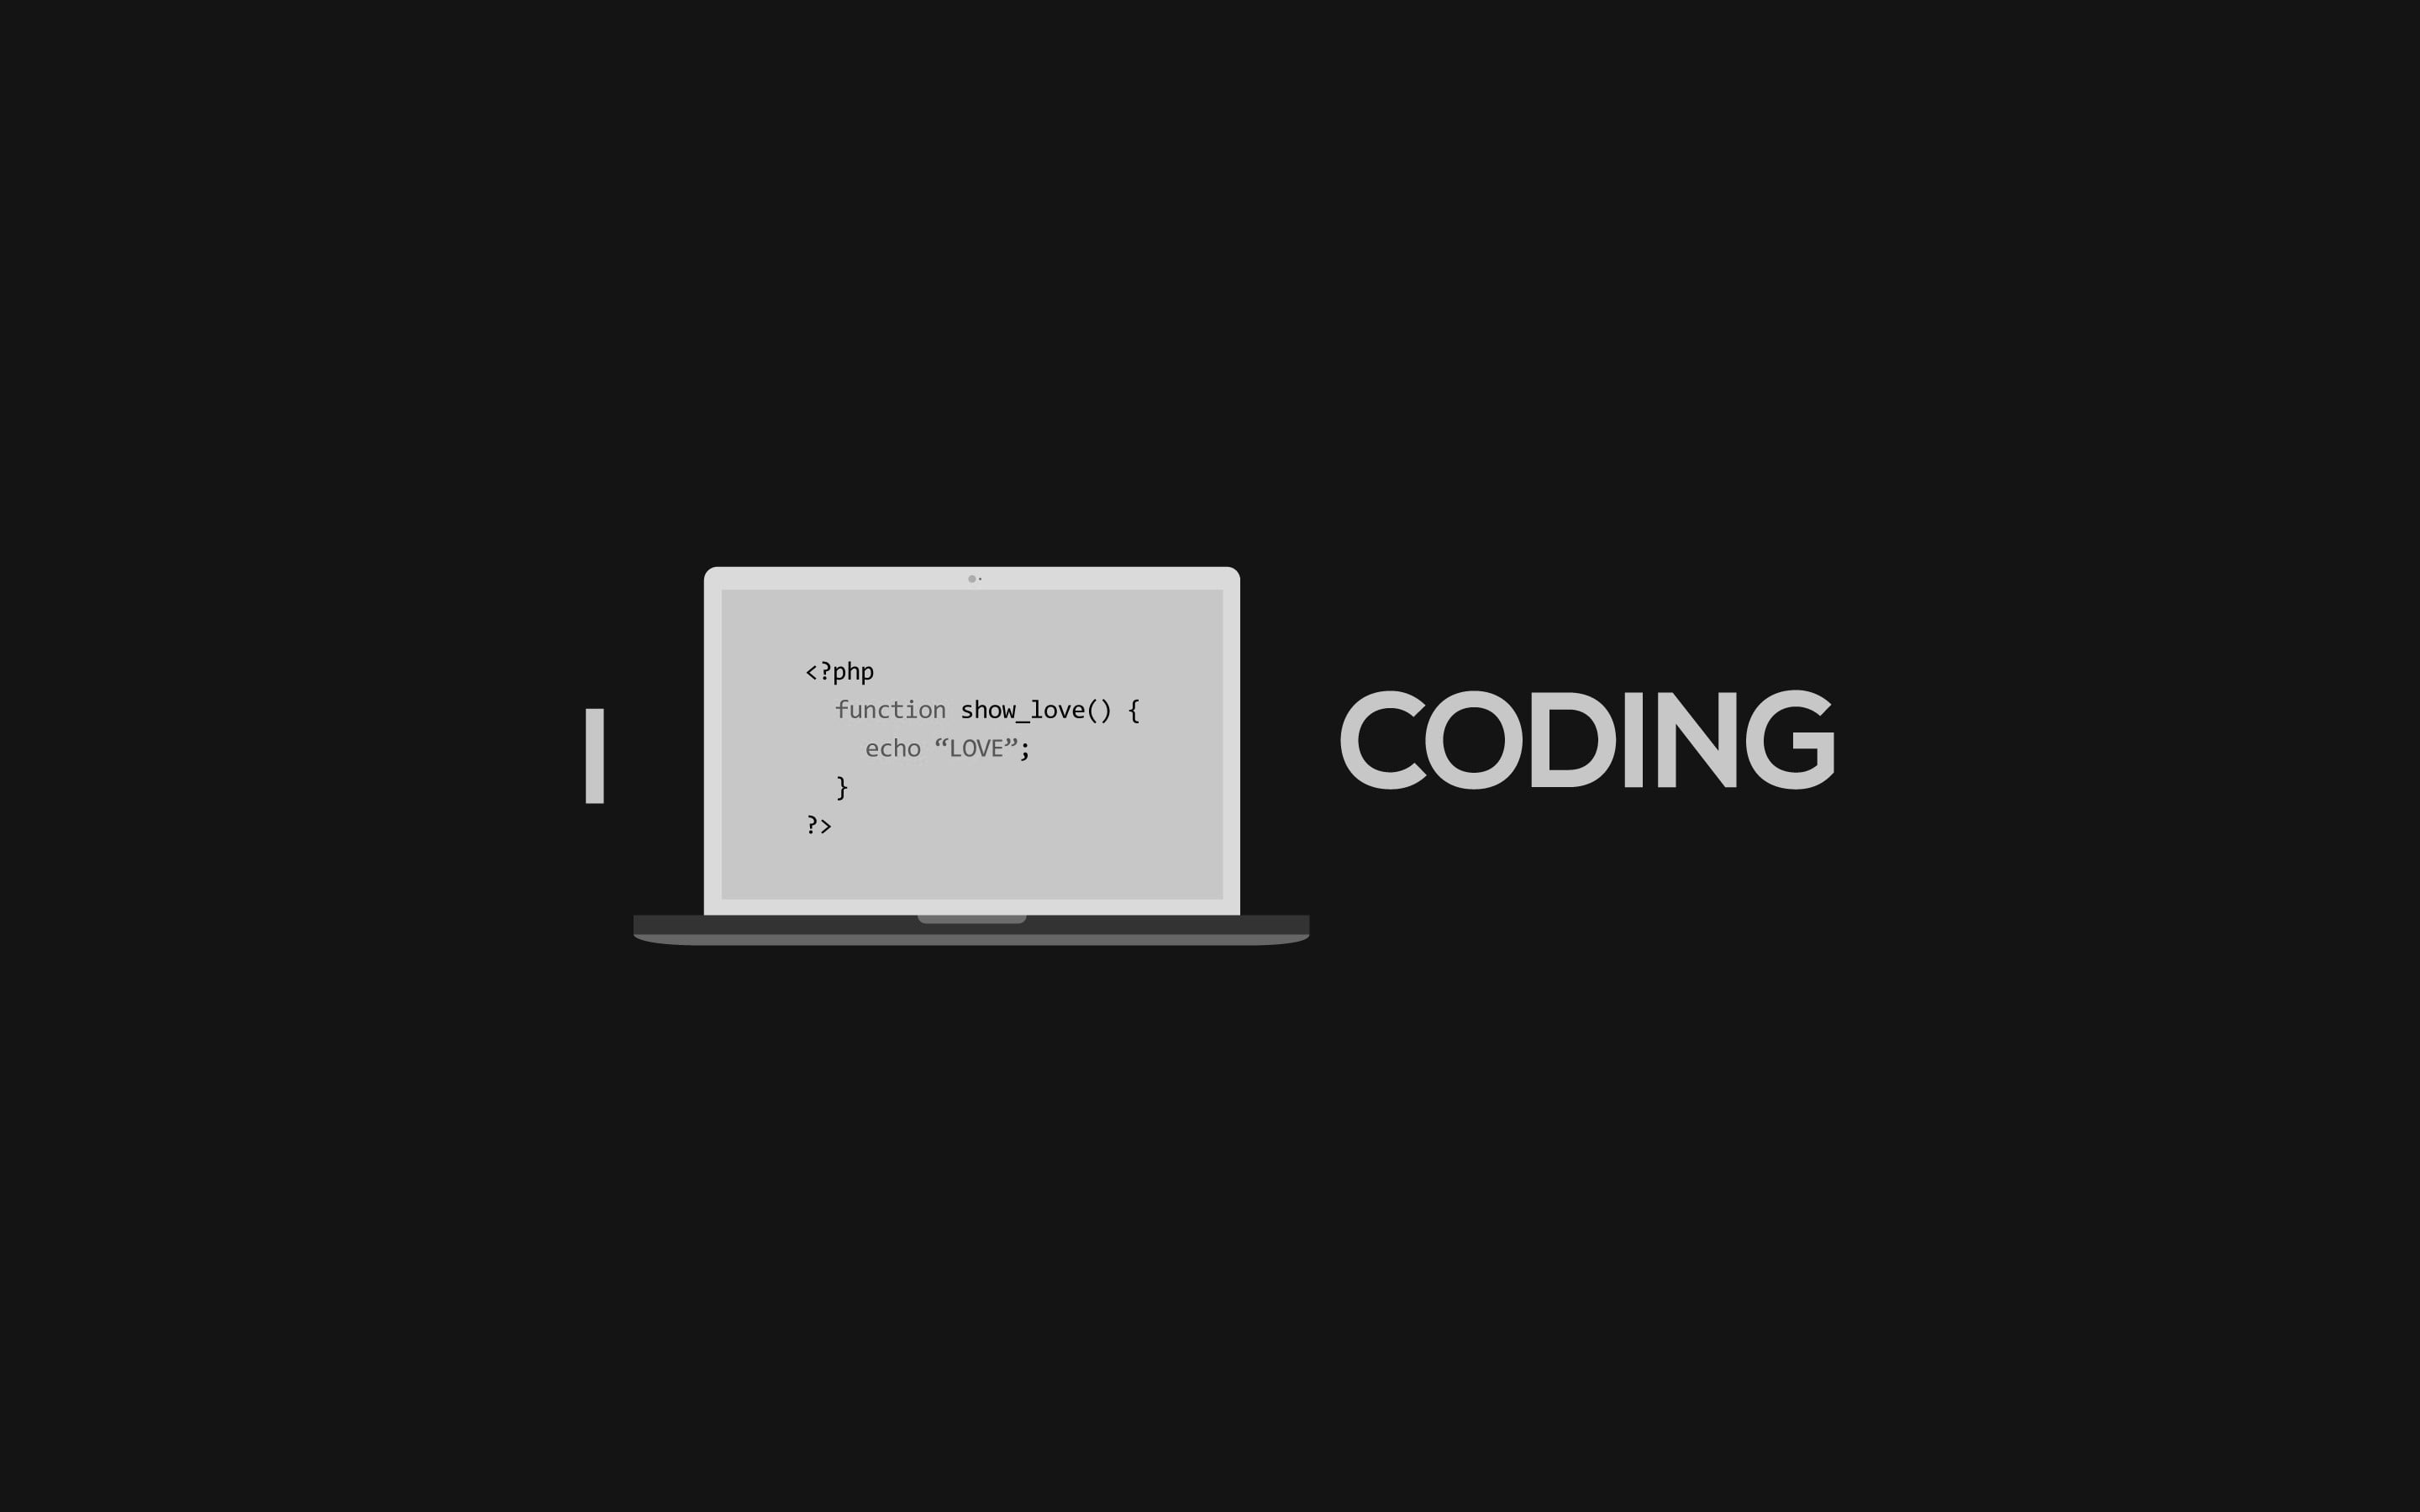 coding text, black background with coding text overlay, programming